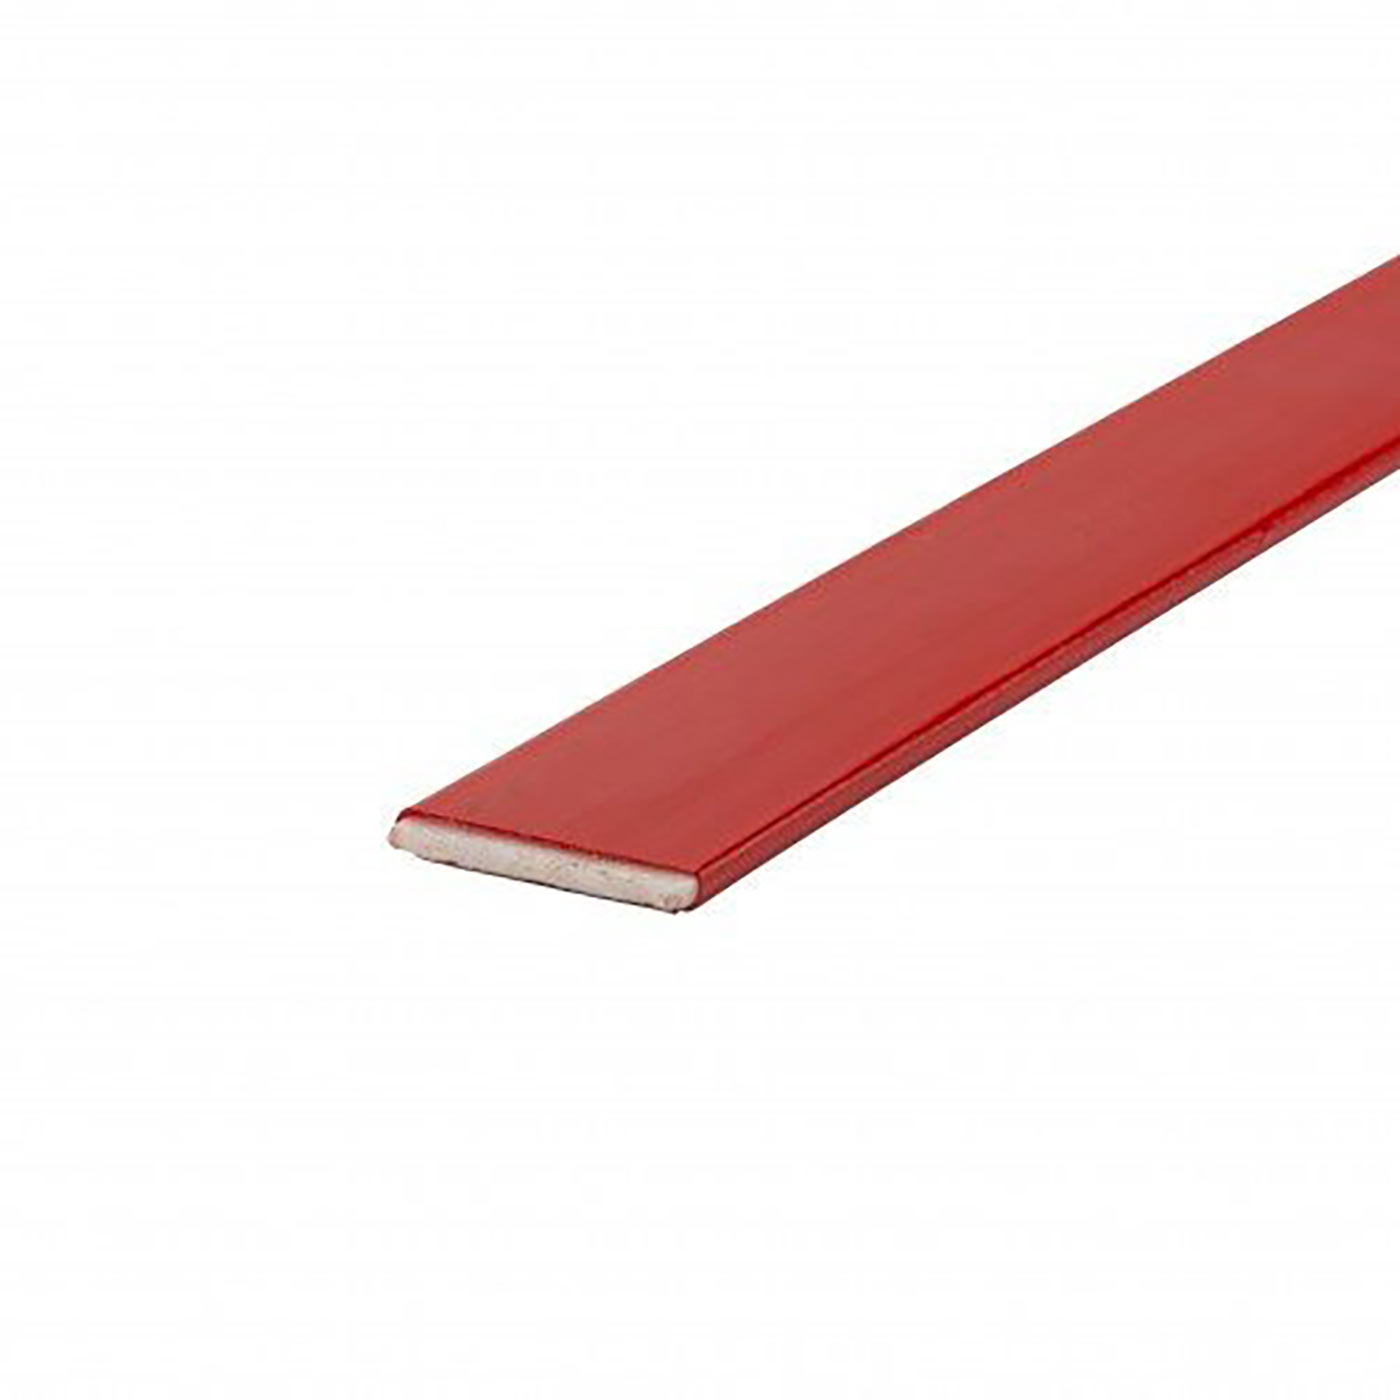 Palusol Strip - Intumescent fireproof material